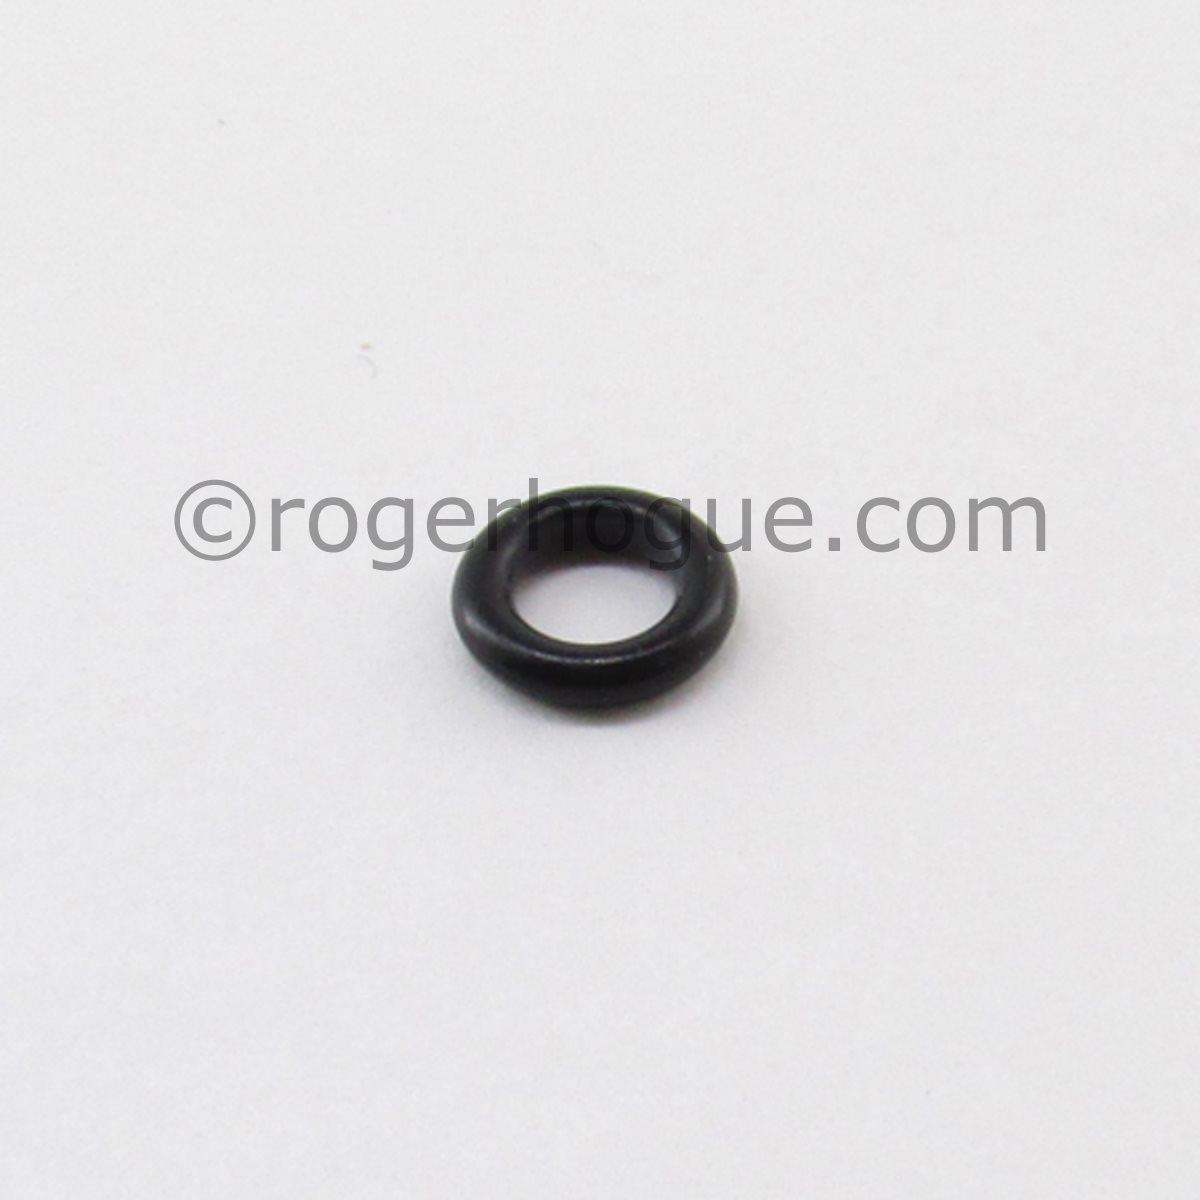 ORING FOR GAS INLET 1.75X5